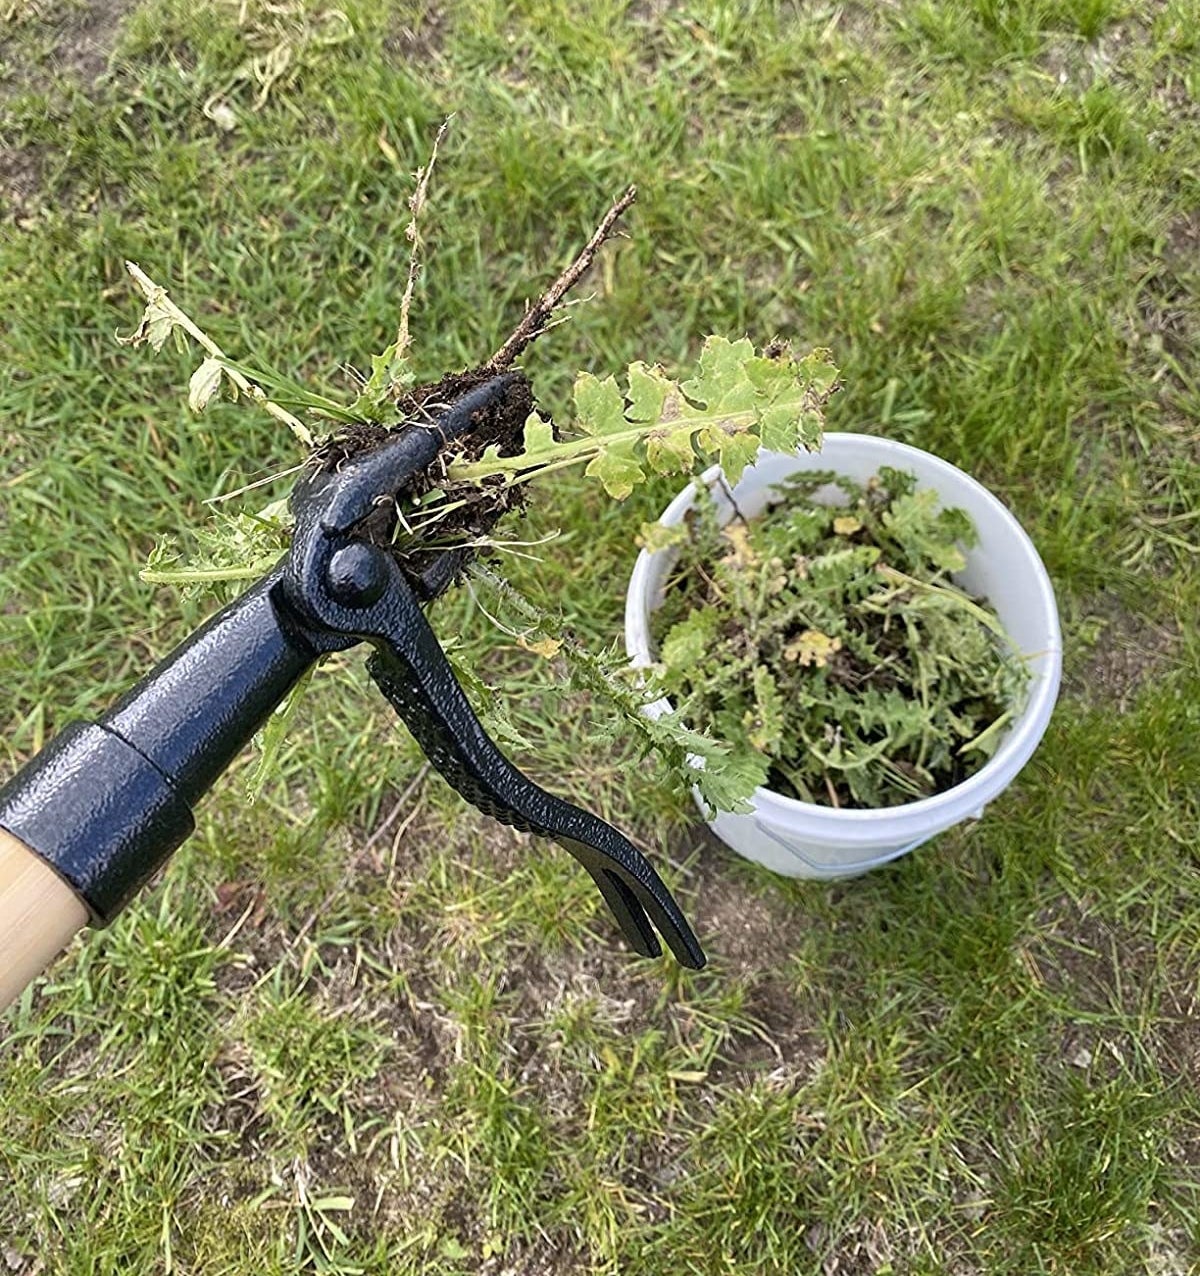 a reviewer photo of the tool holding a weed above a large bucket of weeds